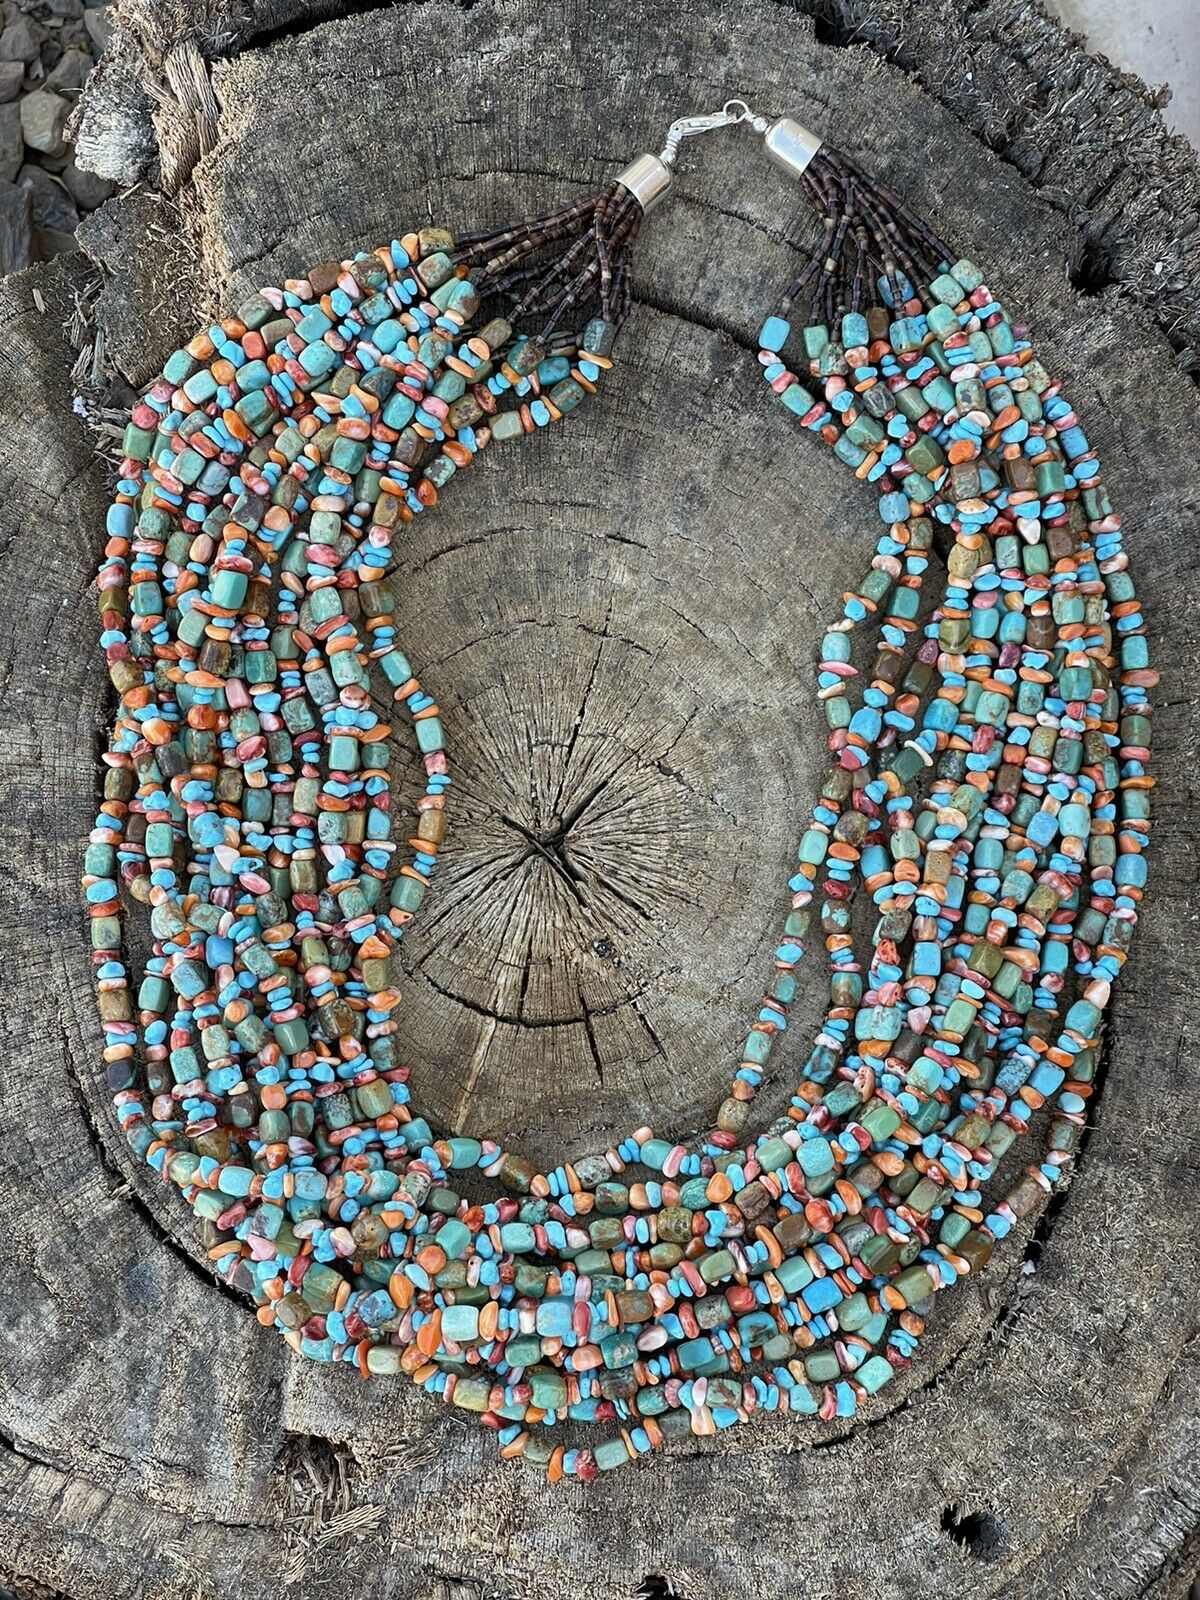 Navajo  Turquoise Multi Stone & Sterling Silver 15 Strand Beaded Necklace